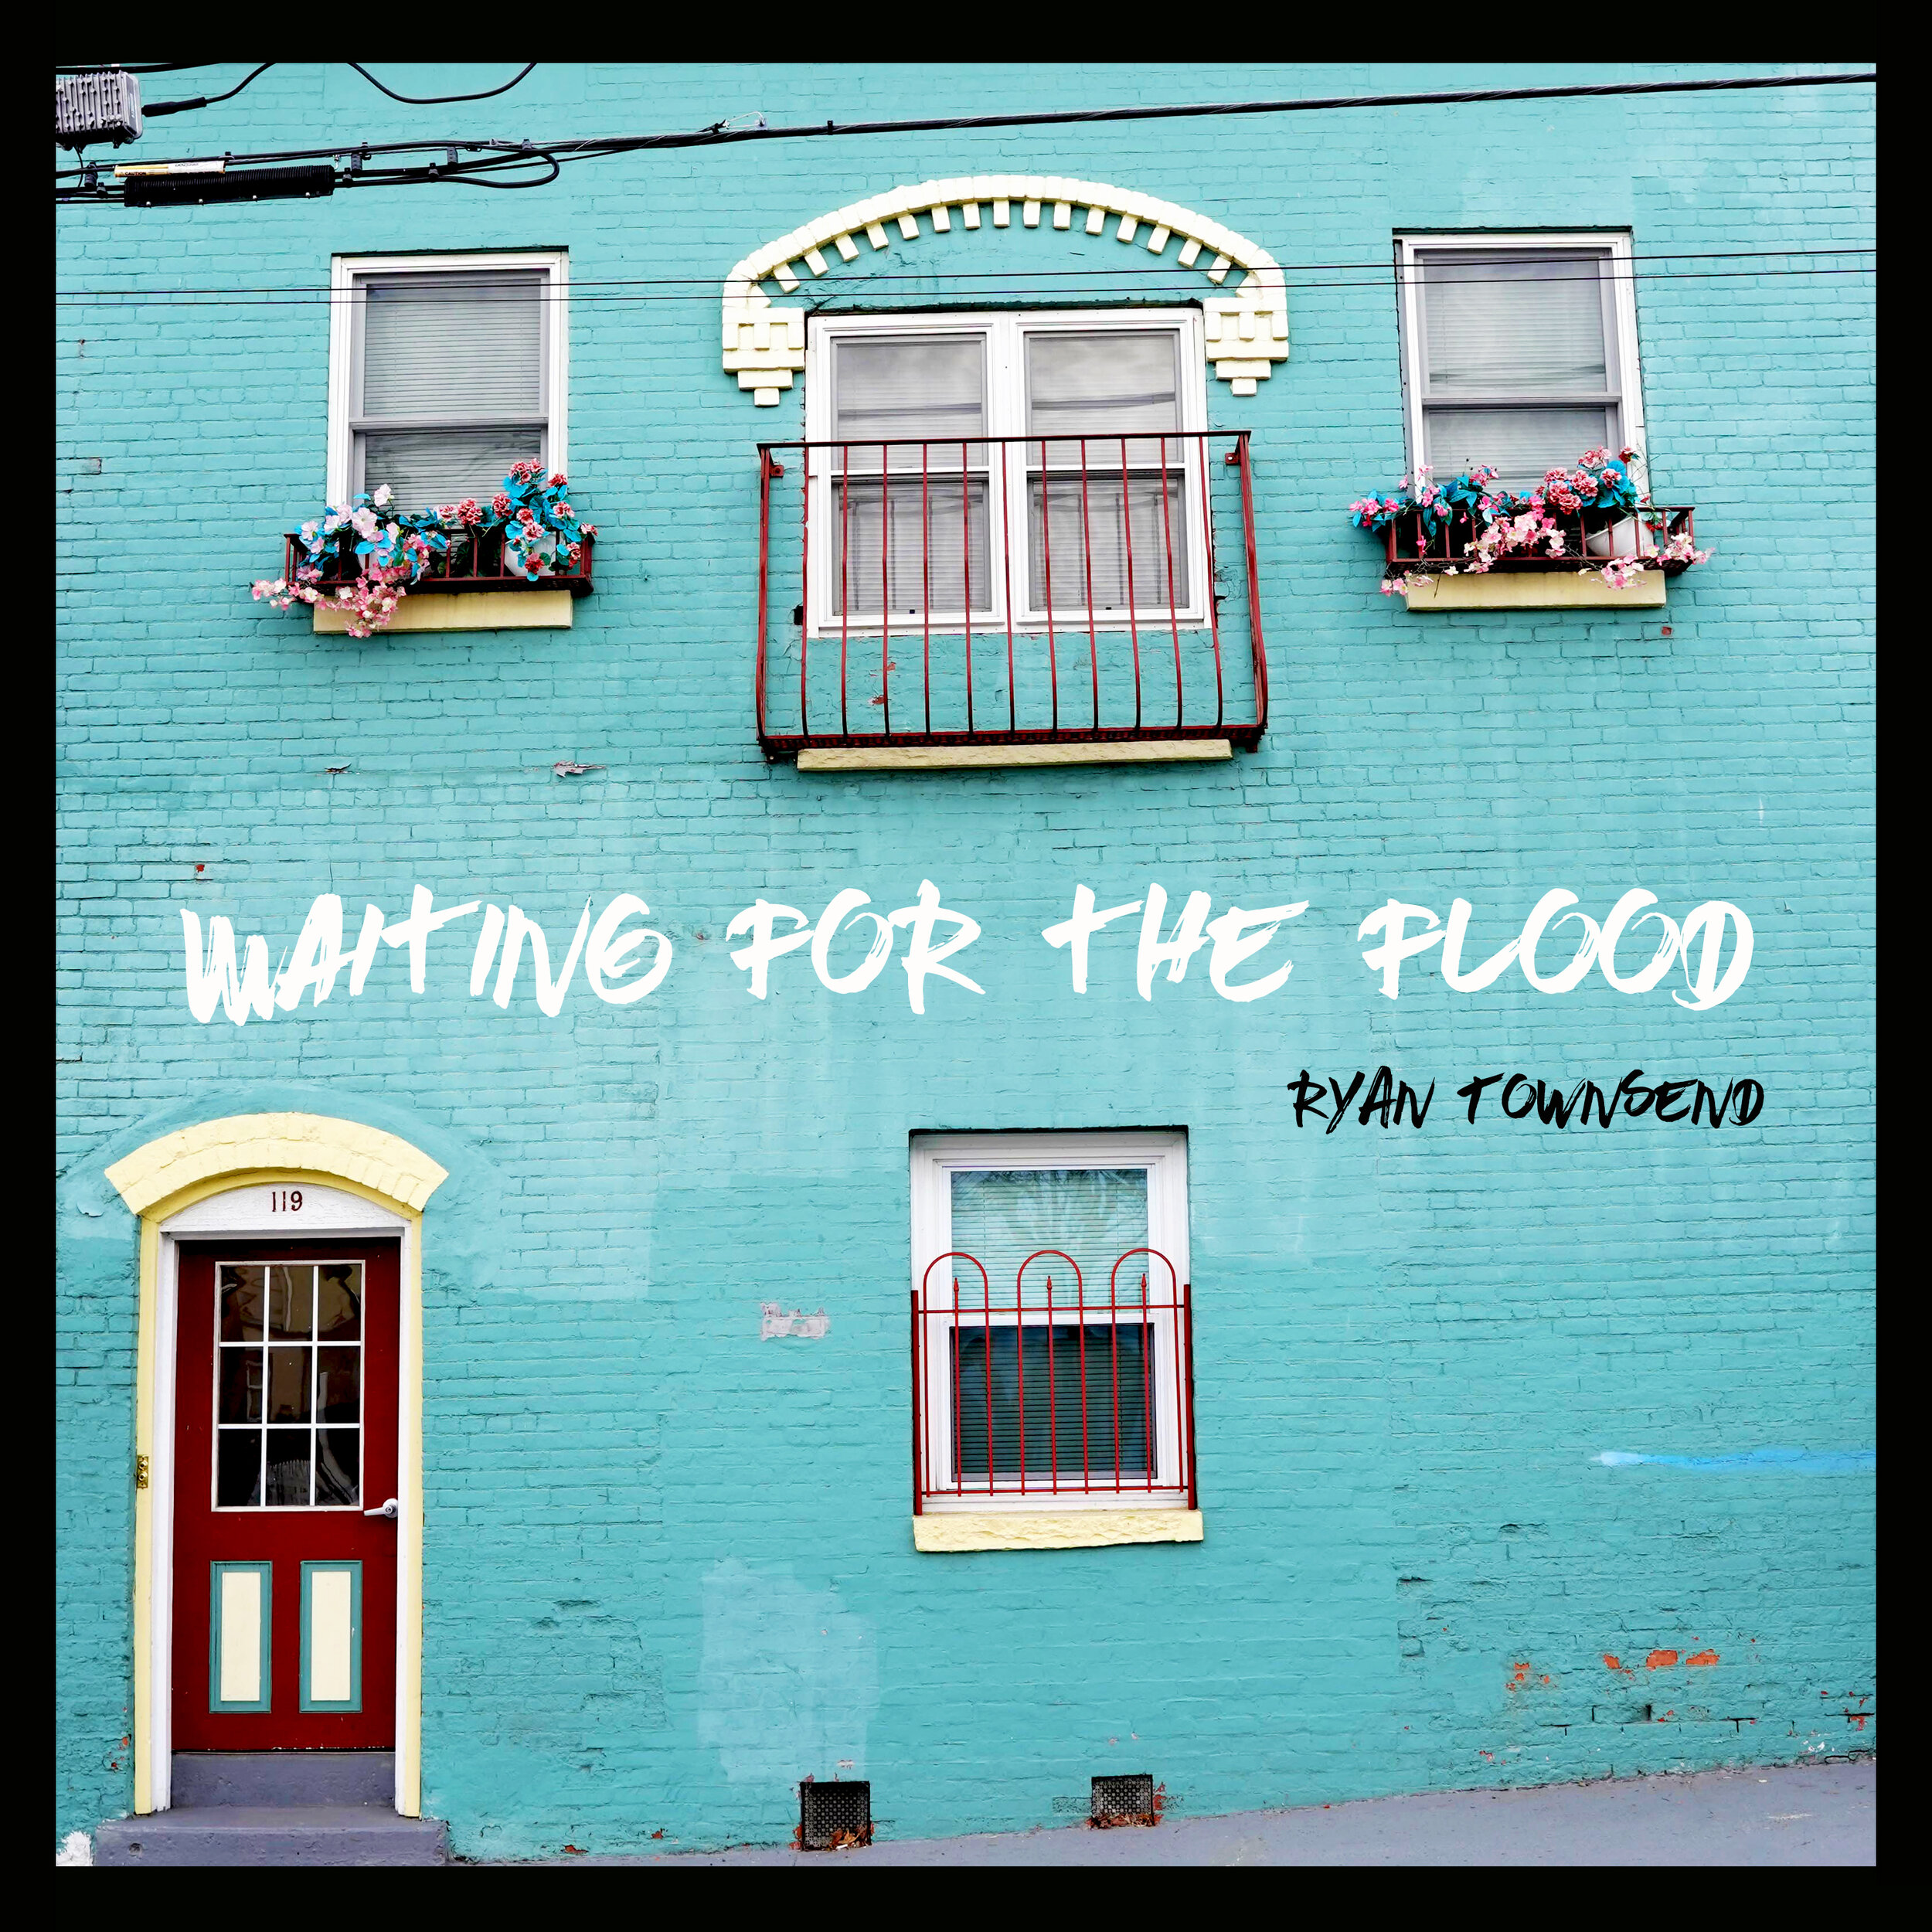 Waiting for the Flood